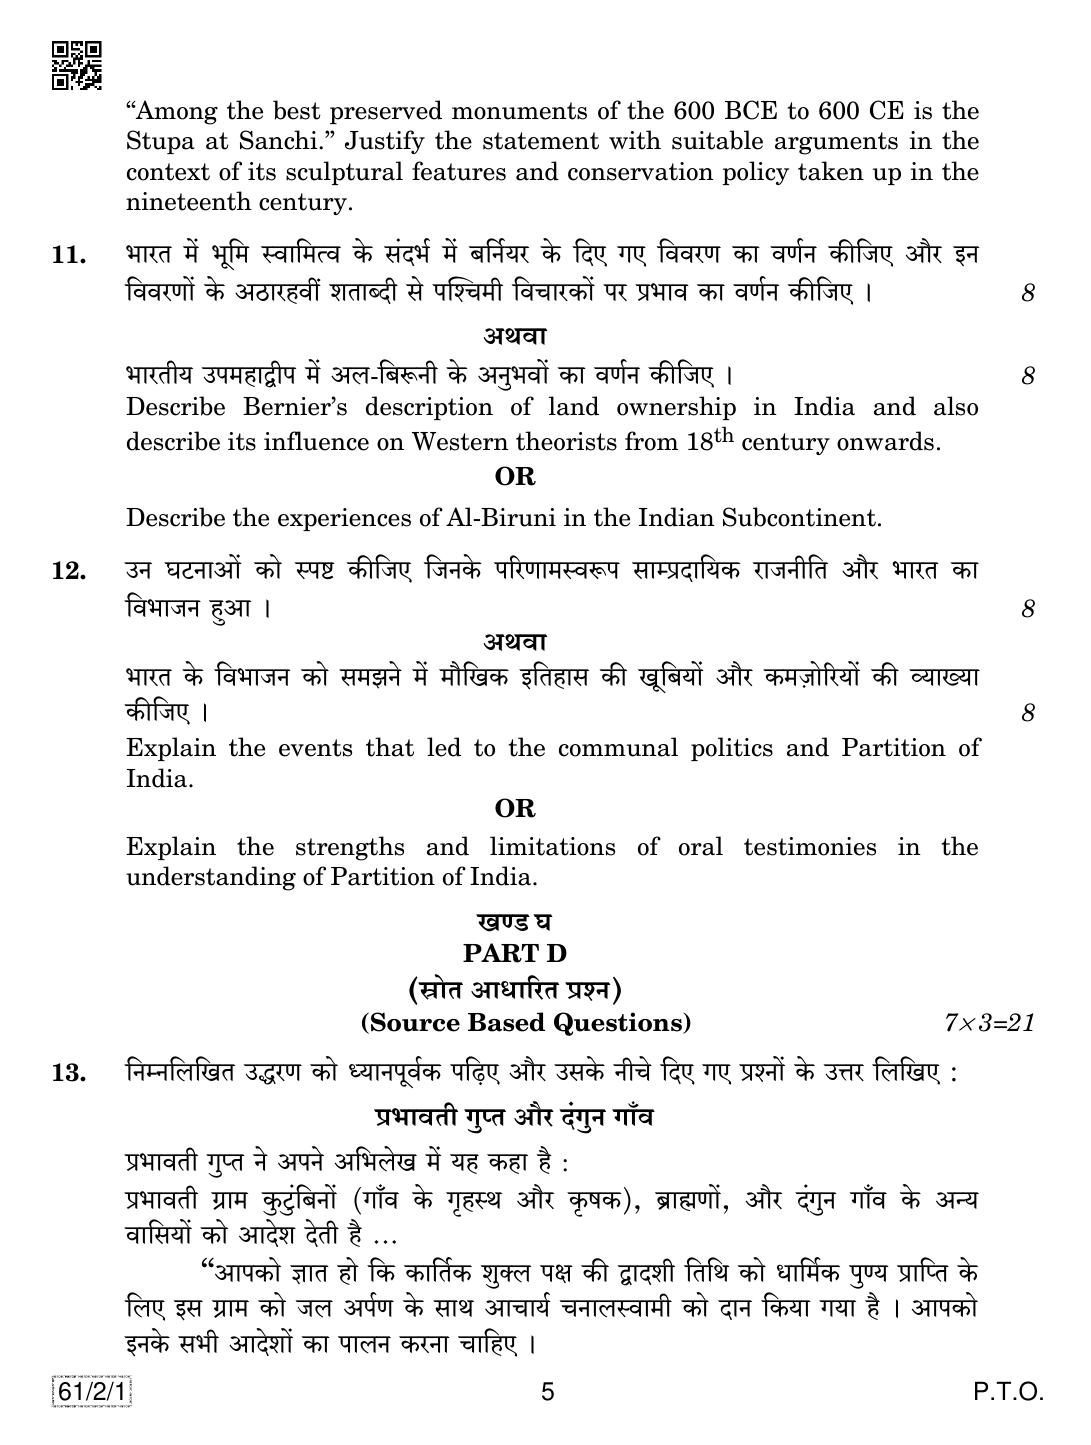 CBSE Class 12 61-2-1 History 2019 Question Paper - Page 5